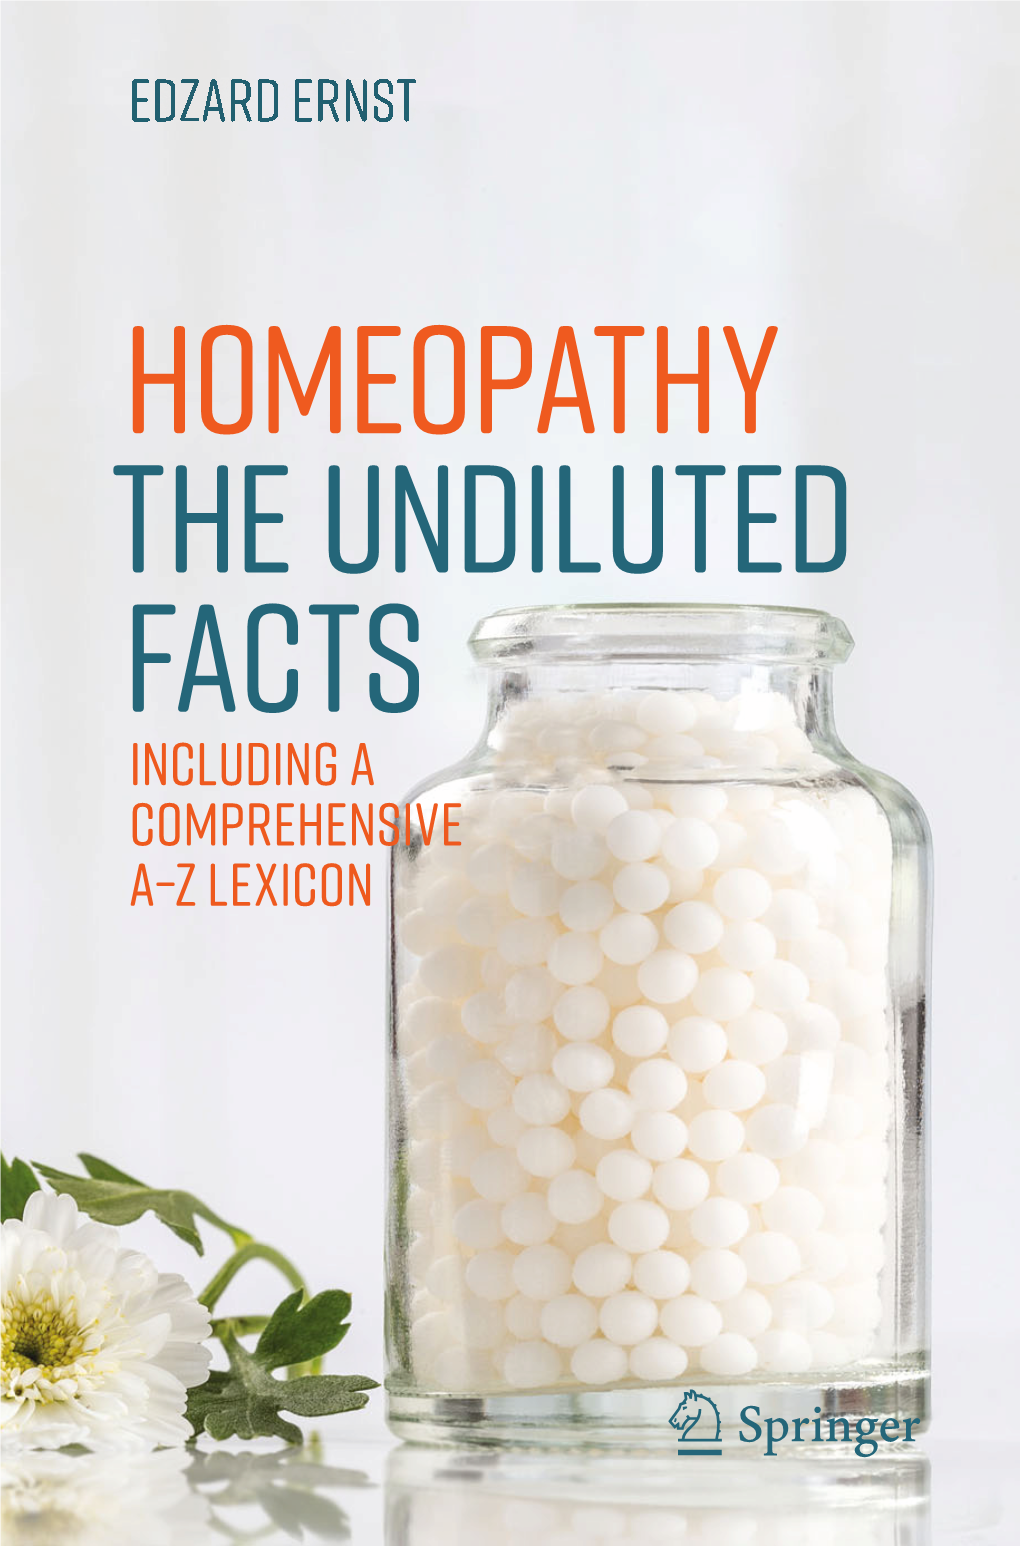 Homeopathy the Undiluted Facts Including a Comprehensive A–Z Lexicon Homeopathy the Undiluted Facts Edzard Ernst